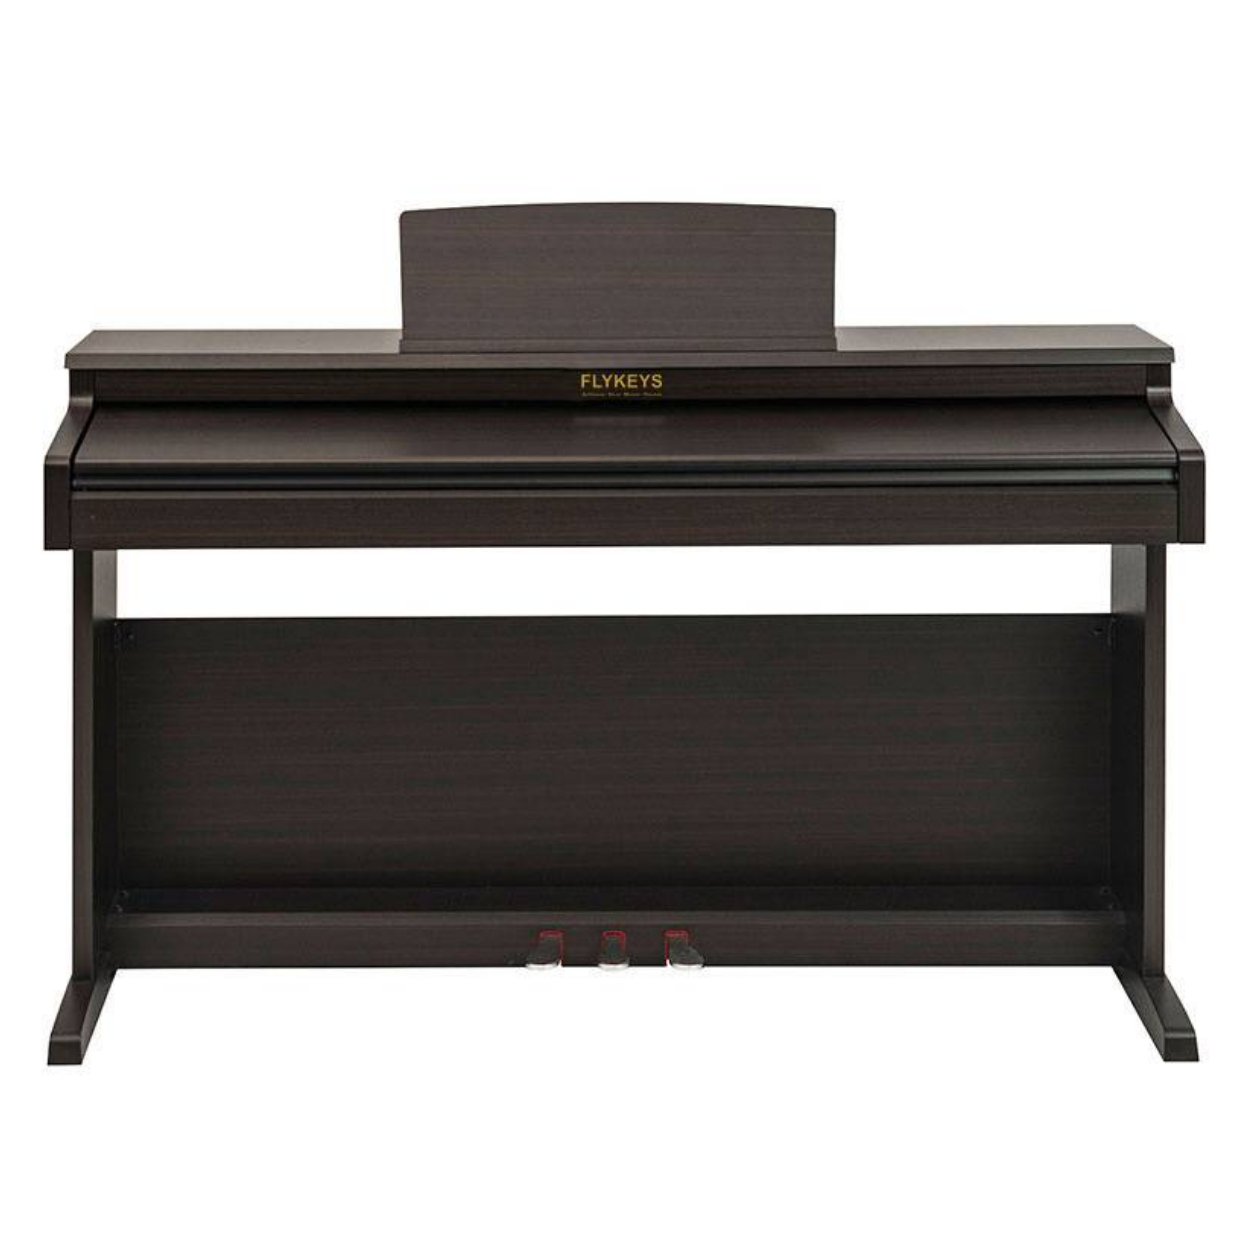 FLYKEYS LK03S-RW 88-KEY DIGITAL PIANO ROSEWOOD INCLUDES BENCH, USB CABLE, HEADPHONE, CLEANING CLOTH, KEY POLISH, FLYKEYS, DIGITAL PIANO, flykeys-digital-piano-fly-lk03s-rw, ZOSO MUSIC SDN BHD